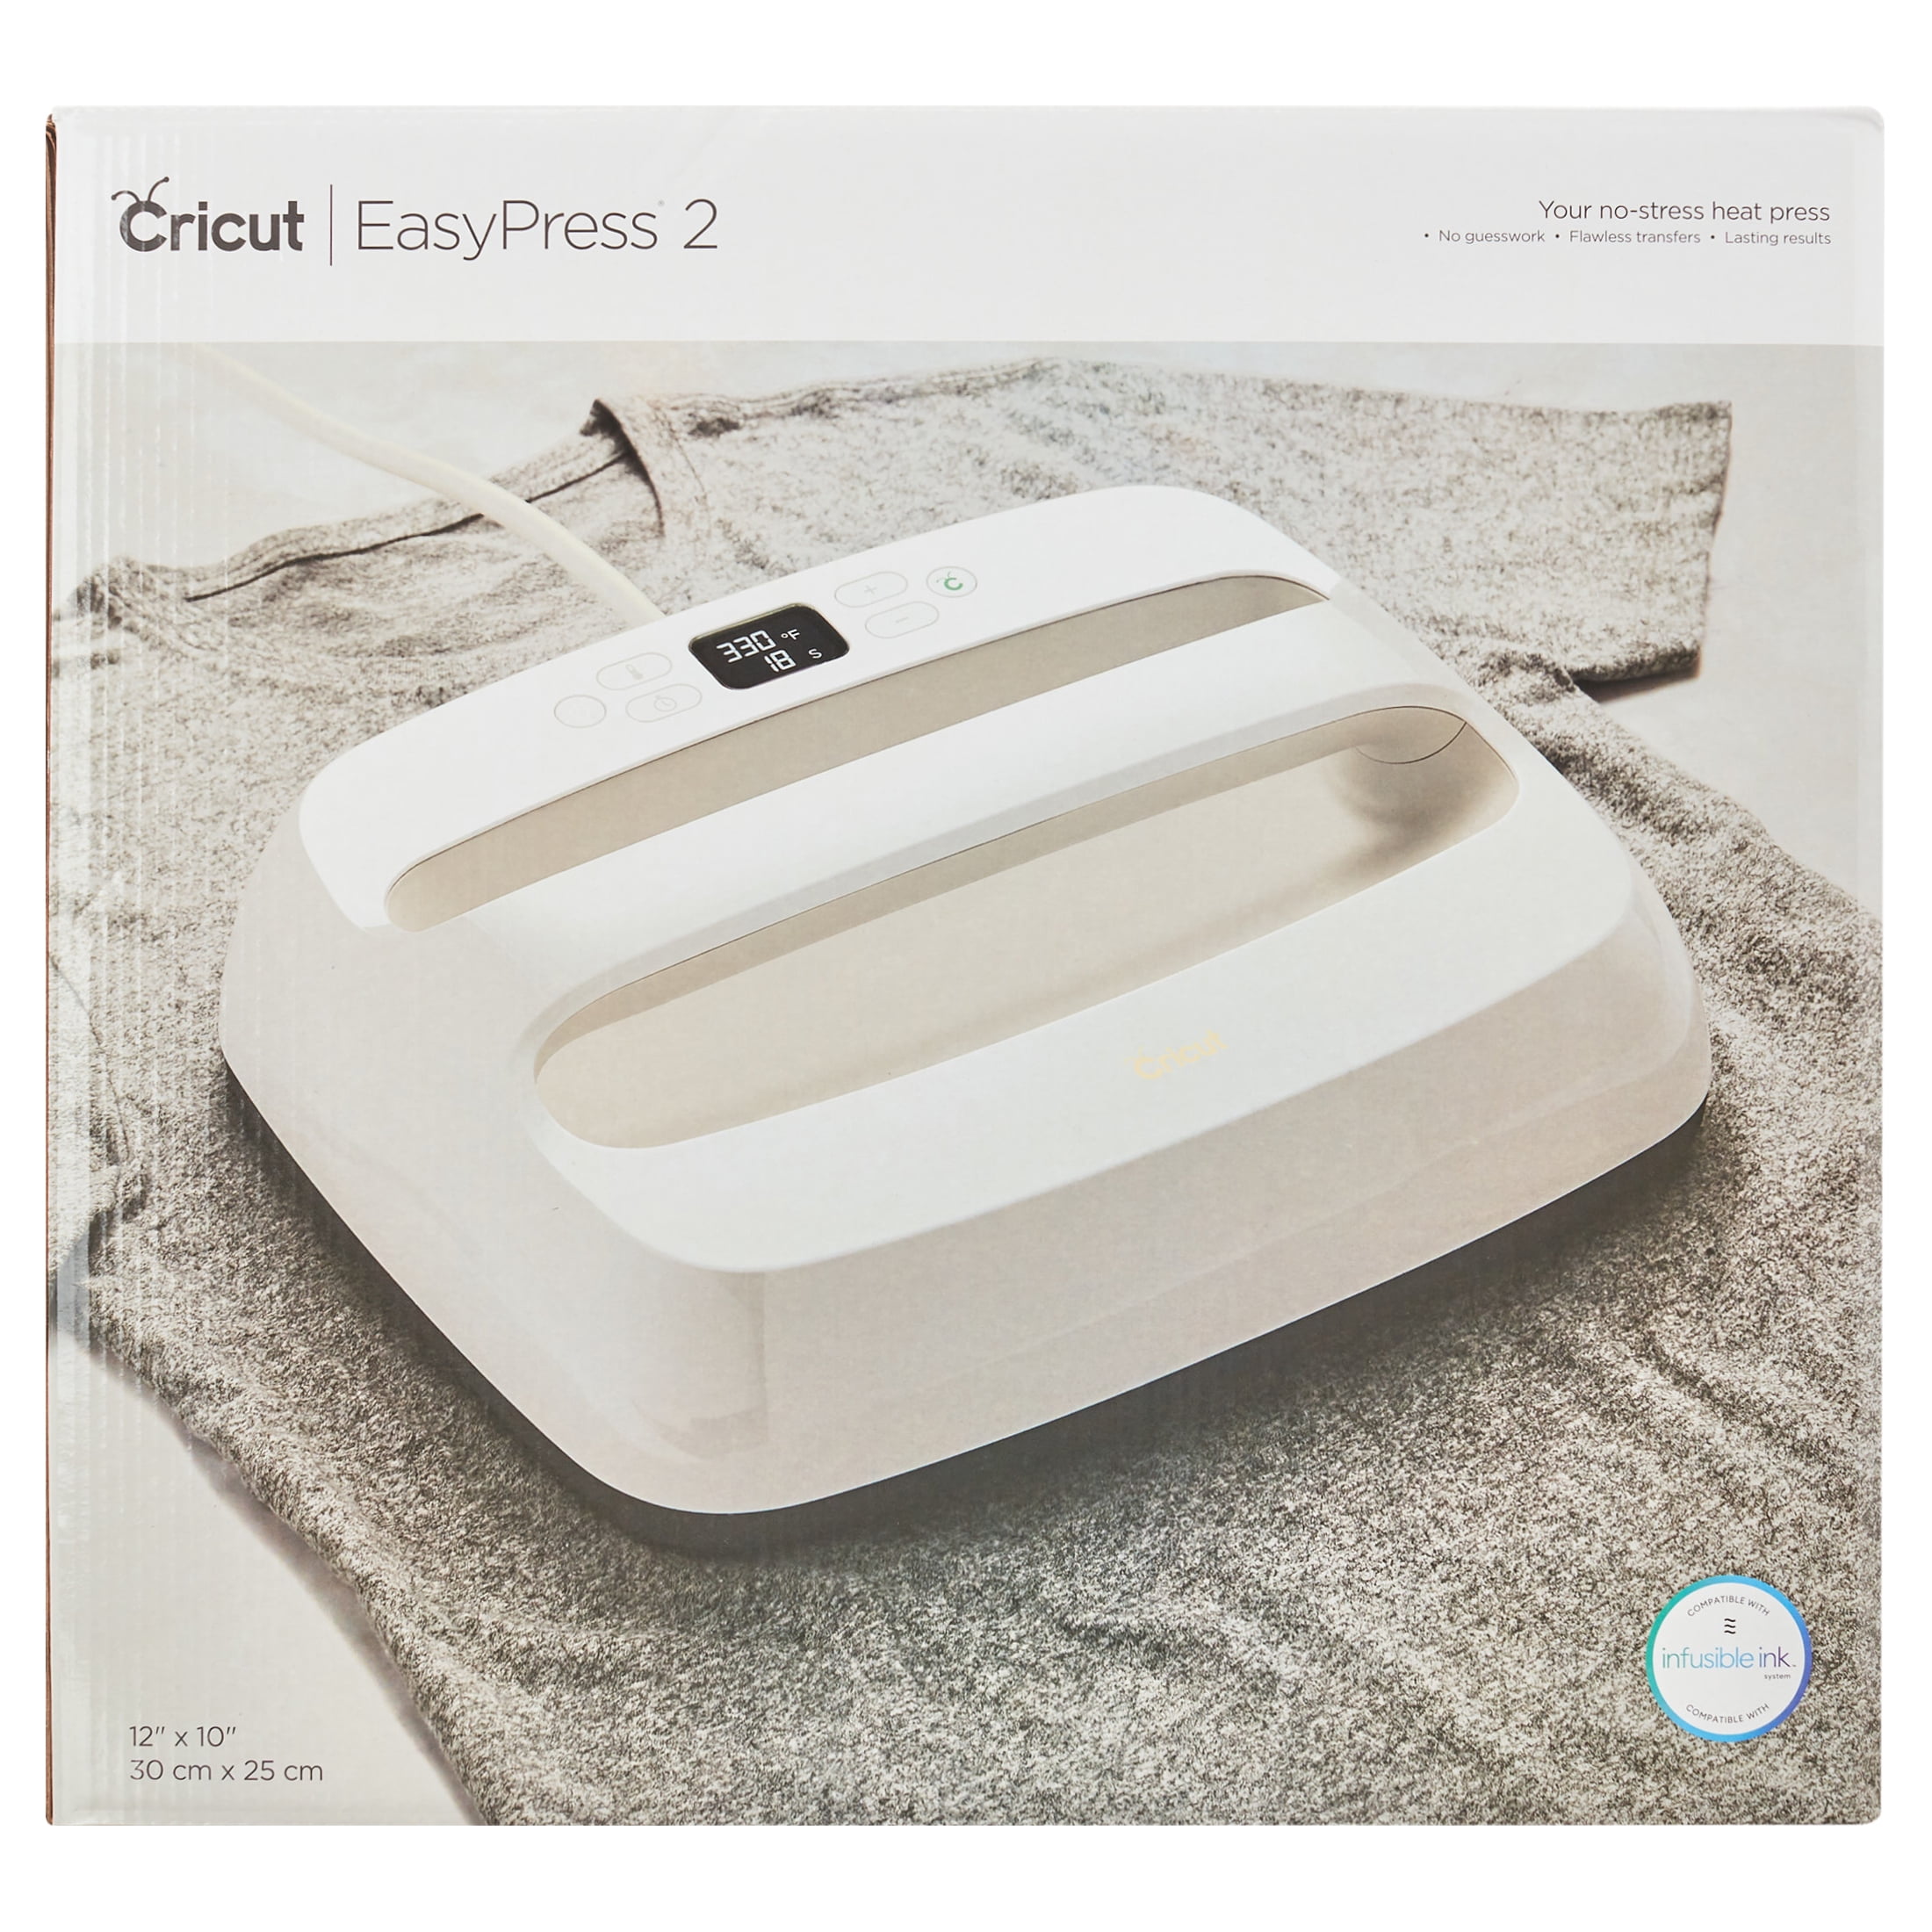 Cricut 9 x 9 EasyPress™ 2 with Iron-On Bundle, Mat and Weeder